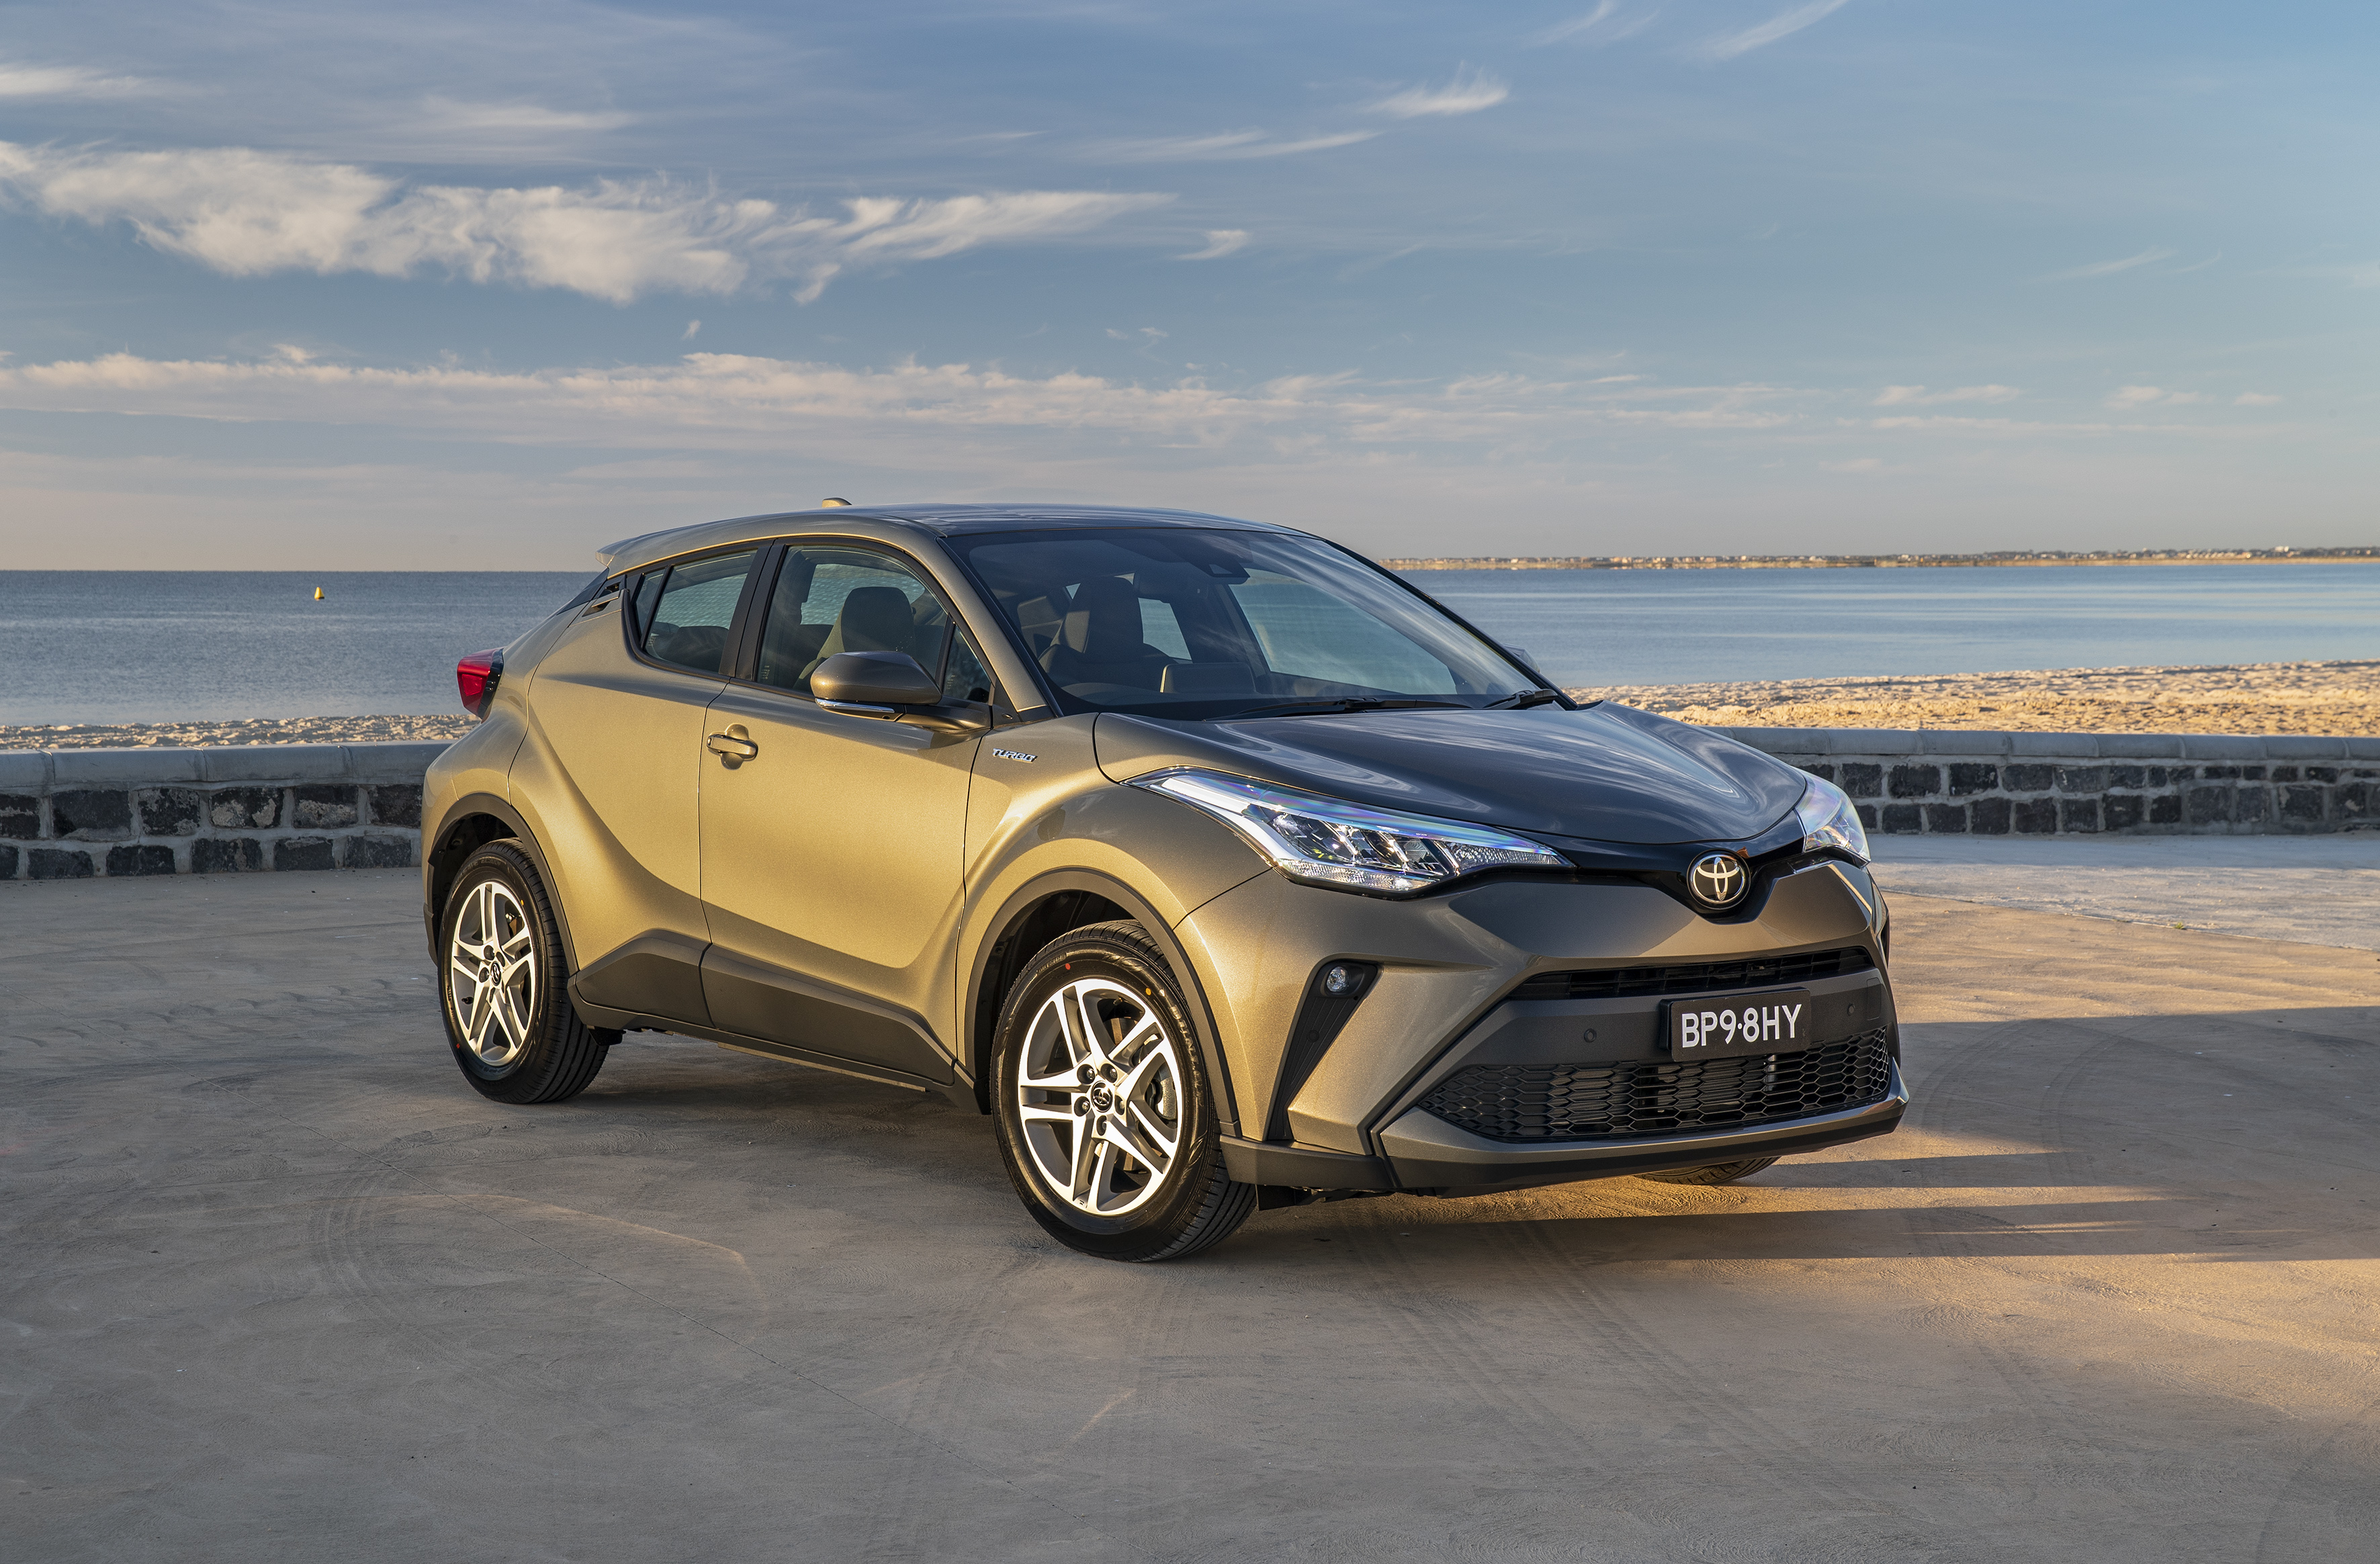 Toyota’s radical CHR compact SUV gets an update including